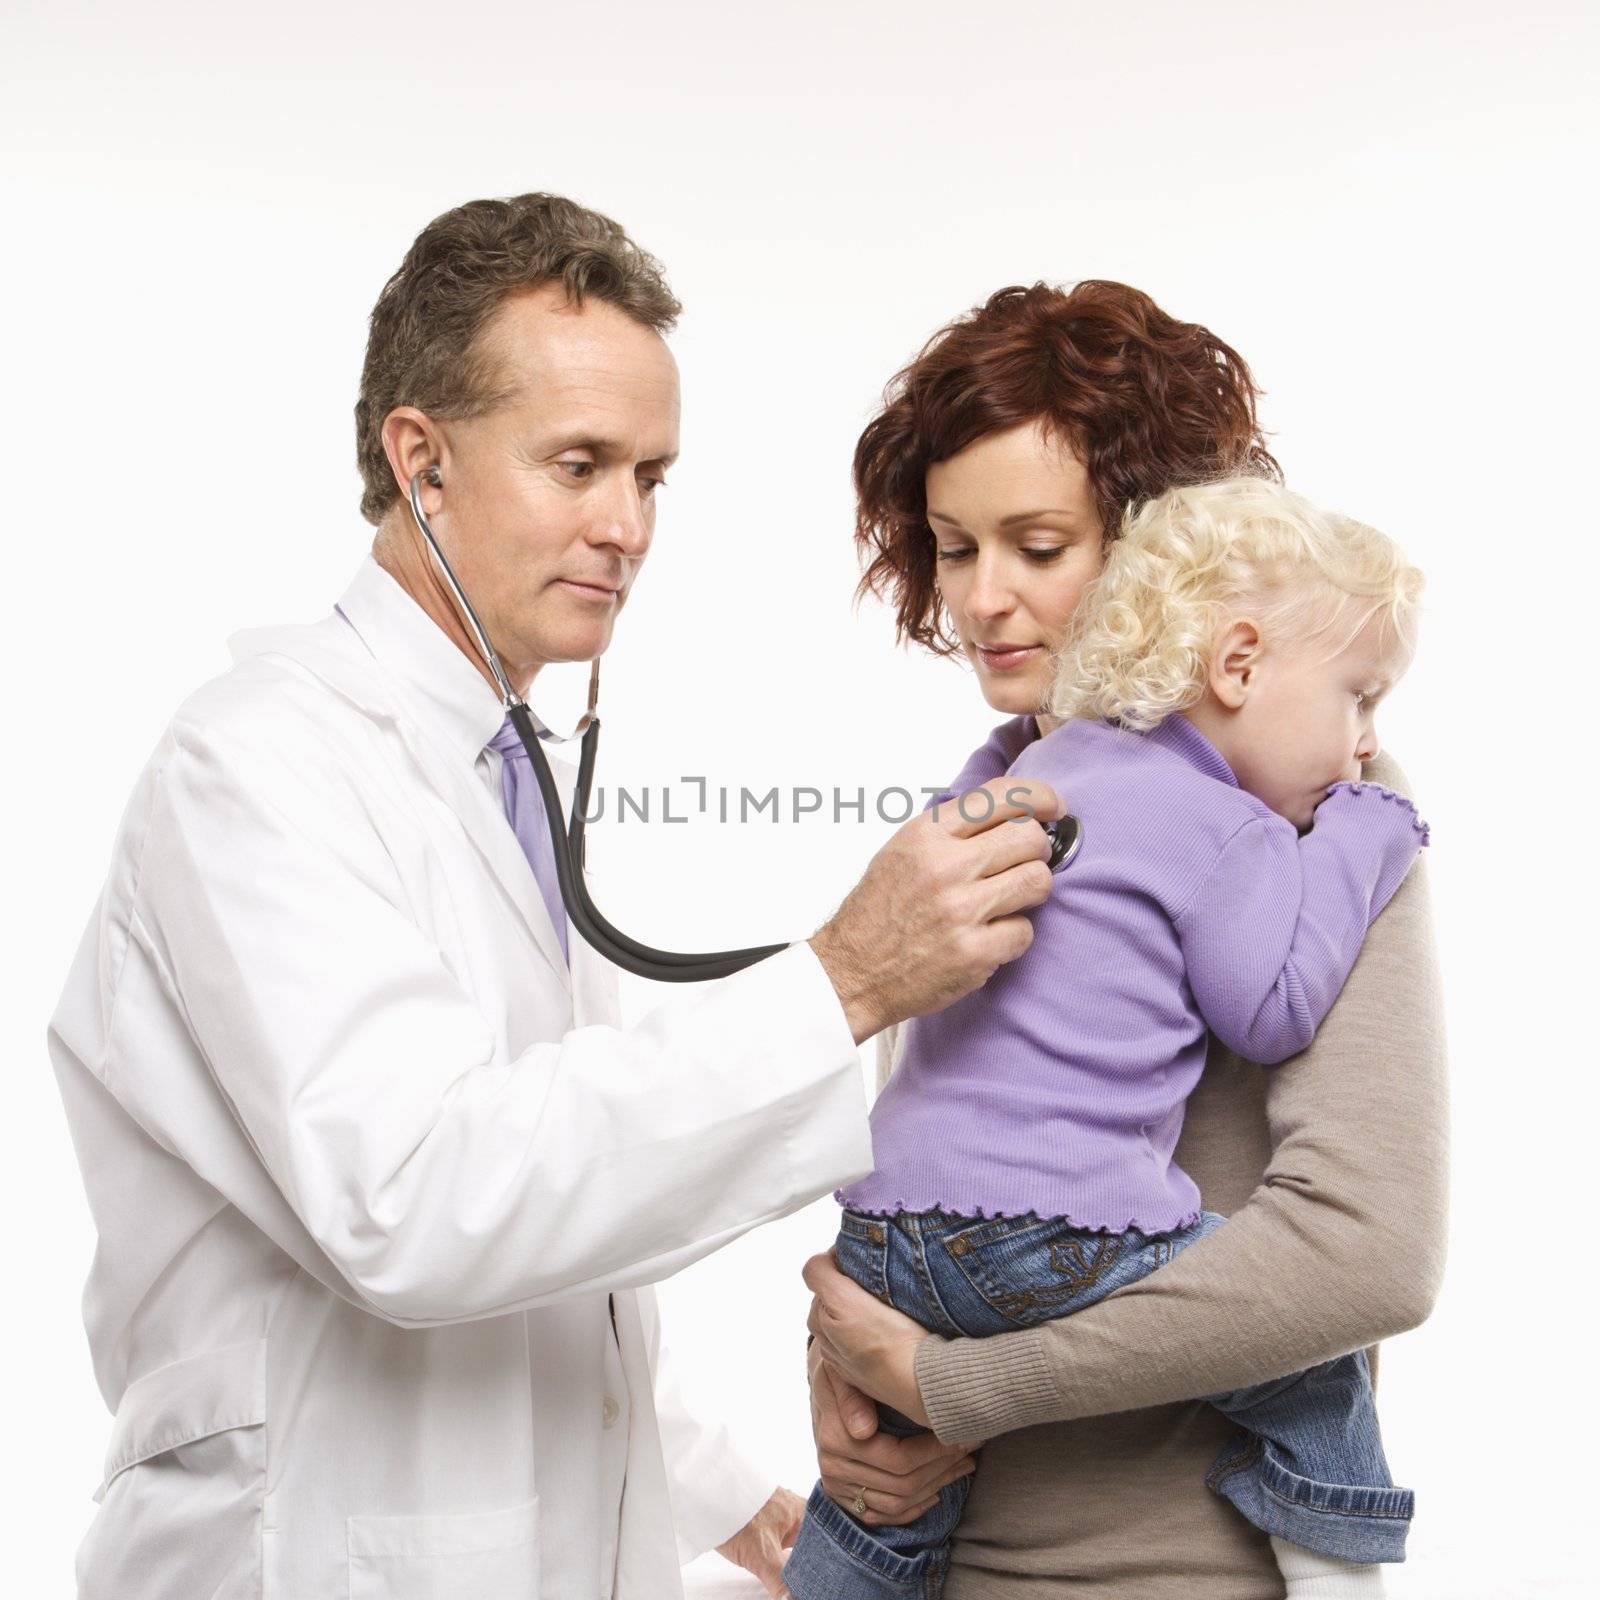 Middle-aged adult Caucasian male doctor holding stethoscope to female toddler's back with mother watching.